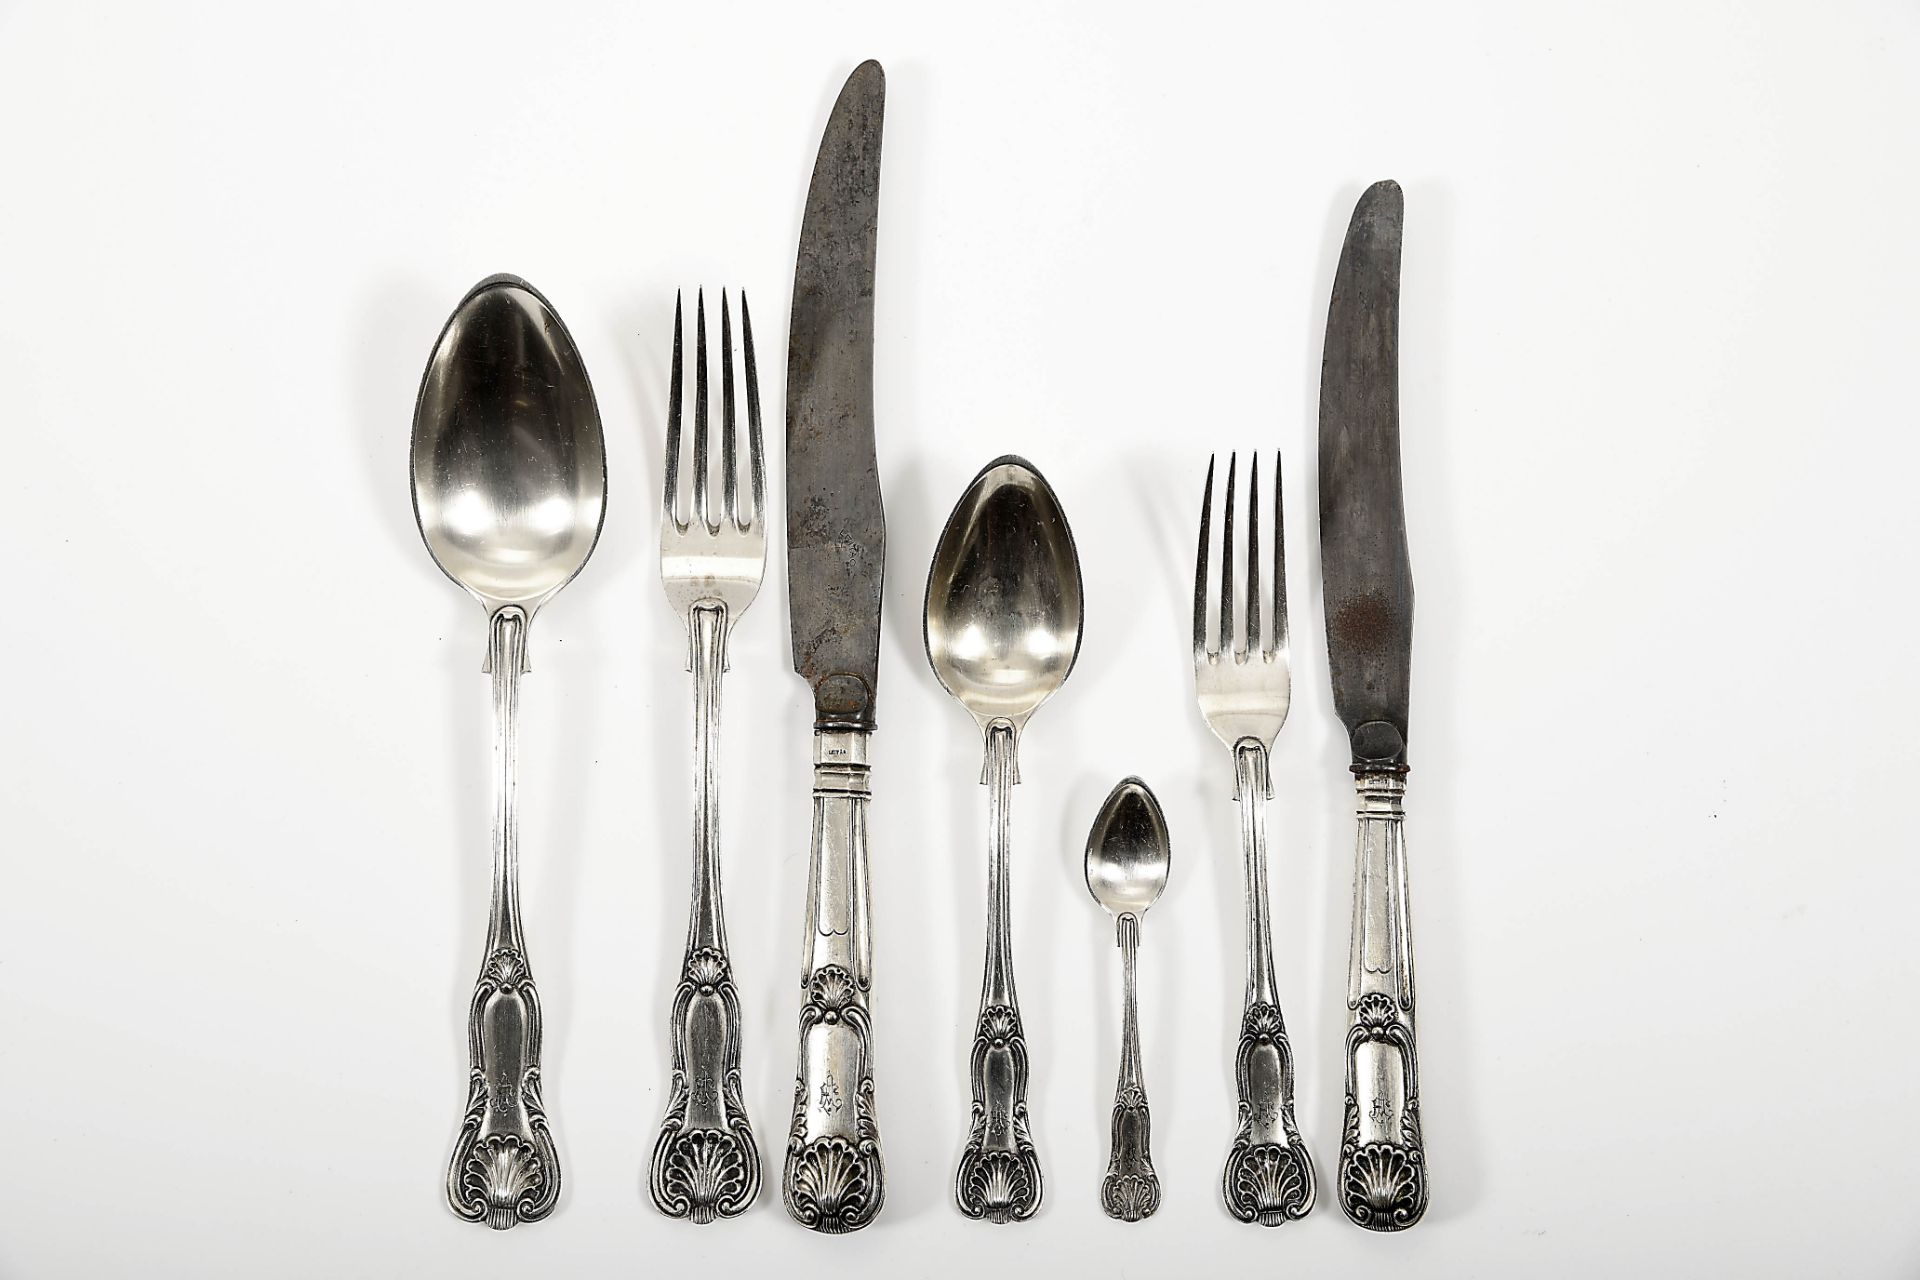 Flatware for 24 people - Image 5 of 6